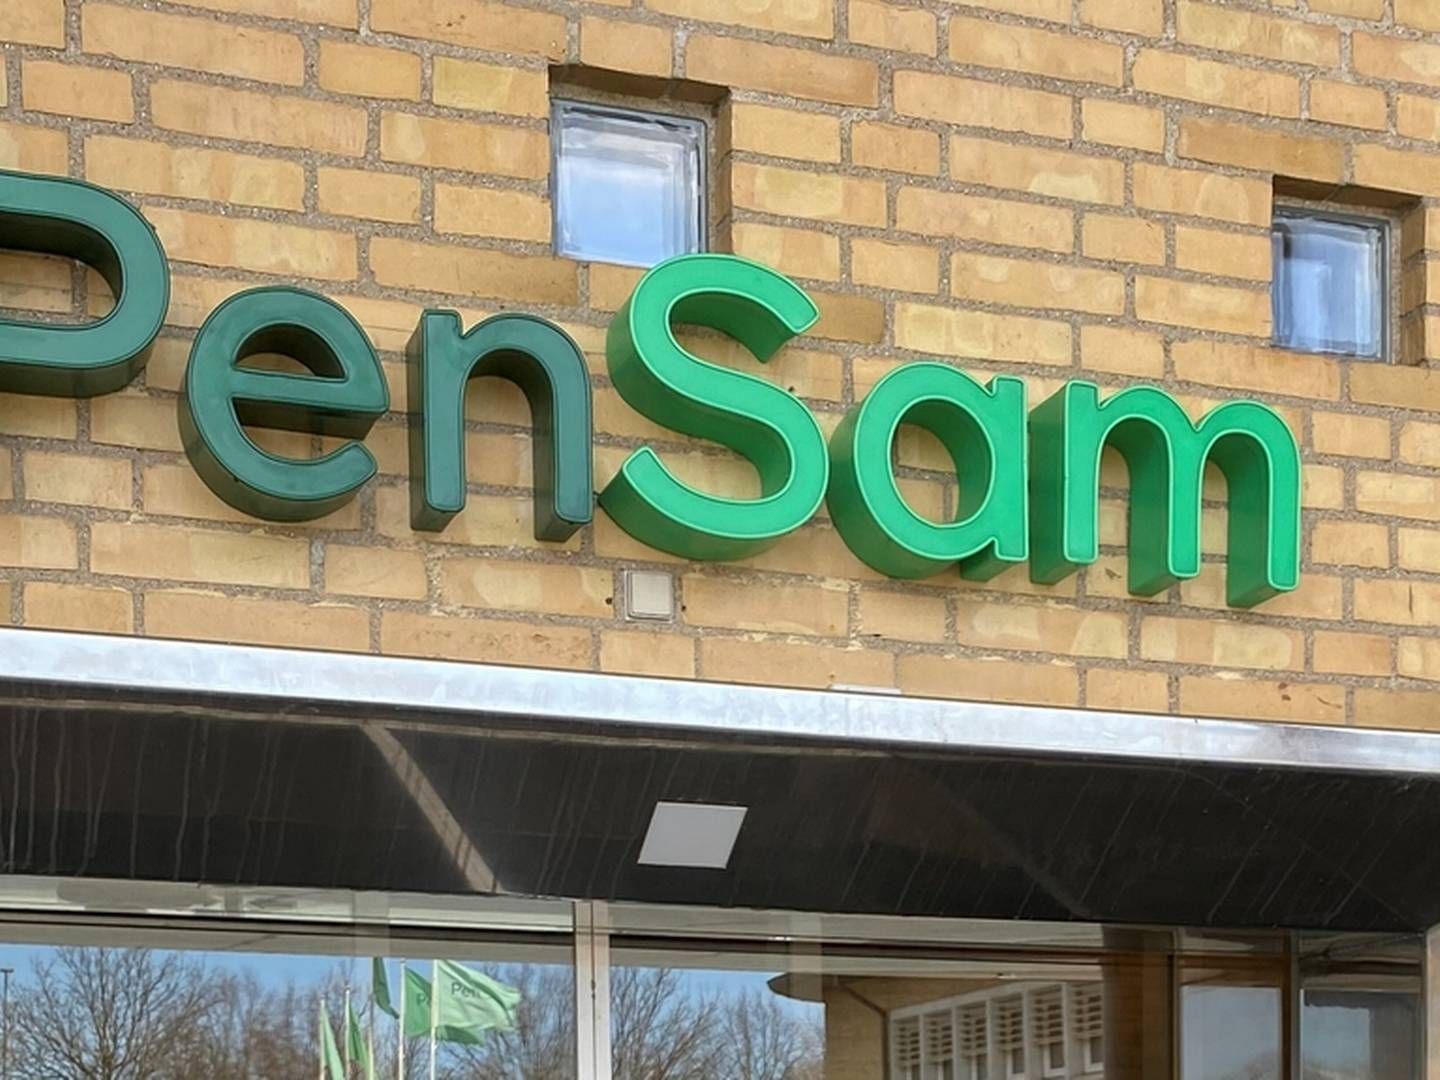 Danish Pensam is one of the ten pension funds that have or have recently had money in an Indian conglomerate accused of improper trading. | Foto: PR/ Pensam Bank